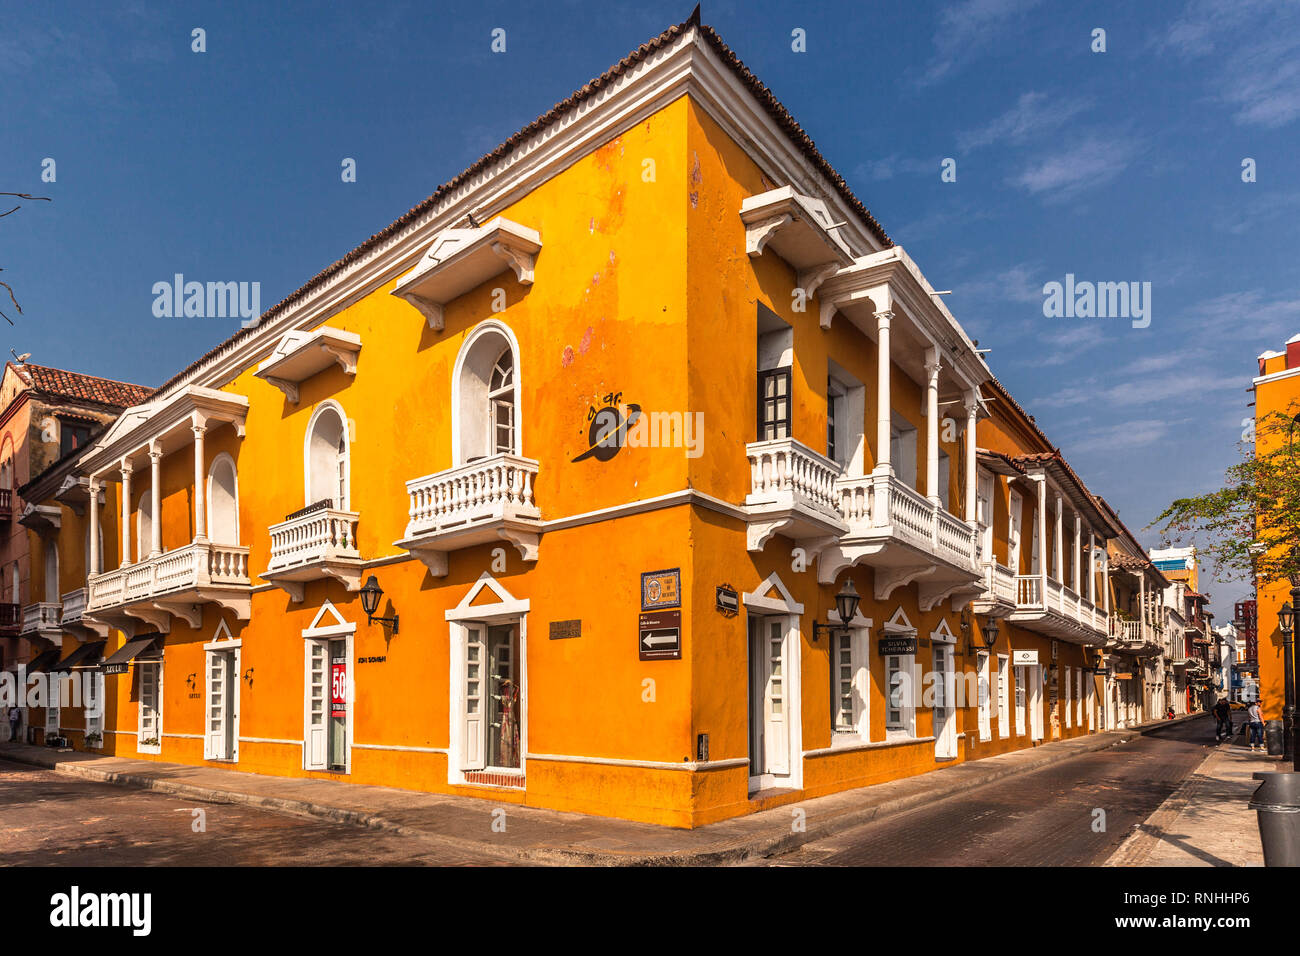 Old Town Spanish colonial architecture, Cartagena de Indias, Colombia. Stock Photo